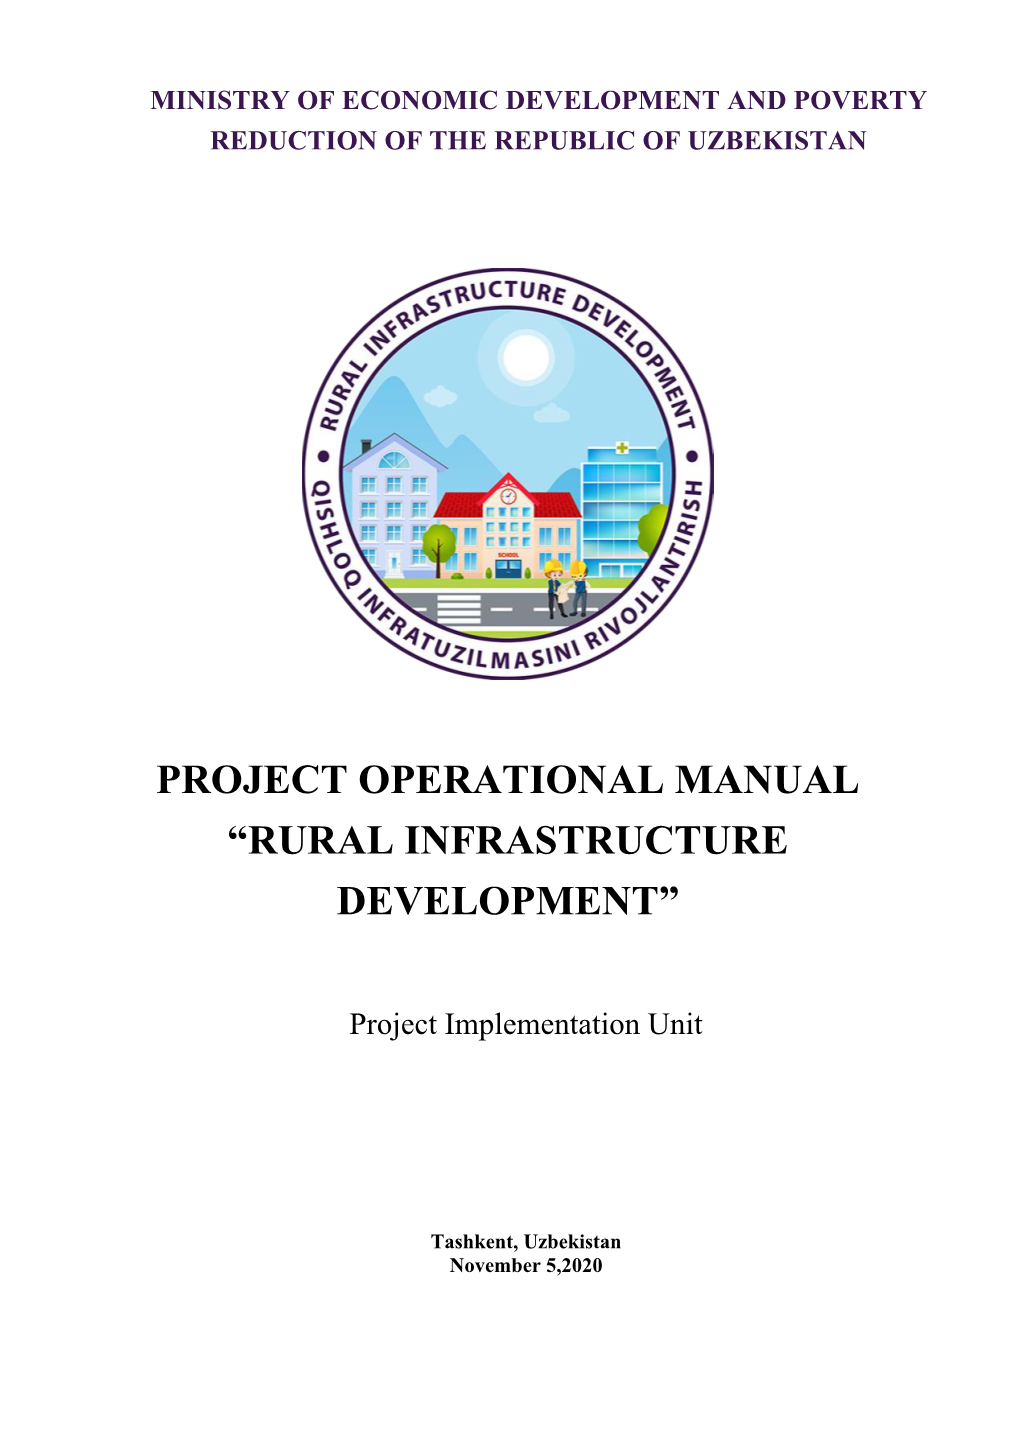 Project Operational Manual “Rural Infrastructure Development”